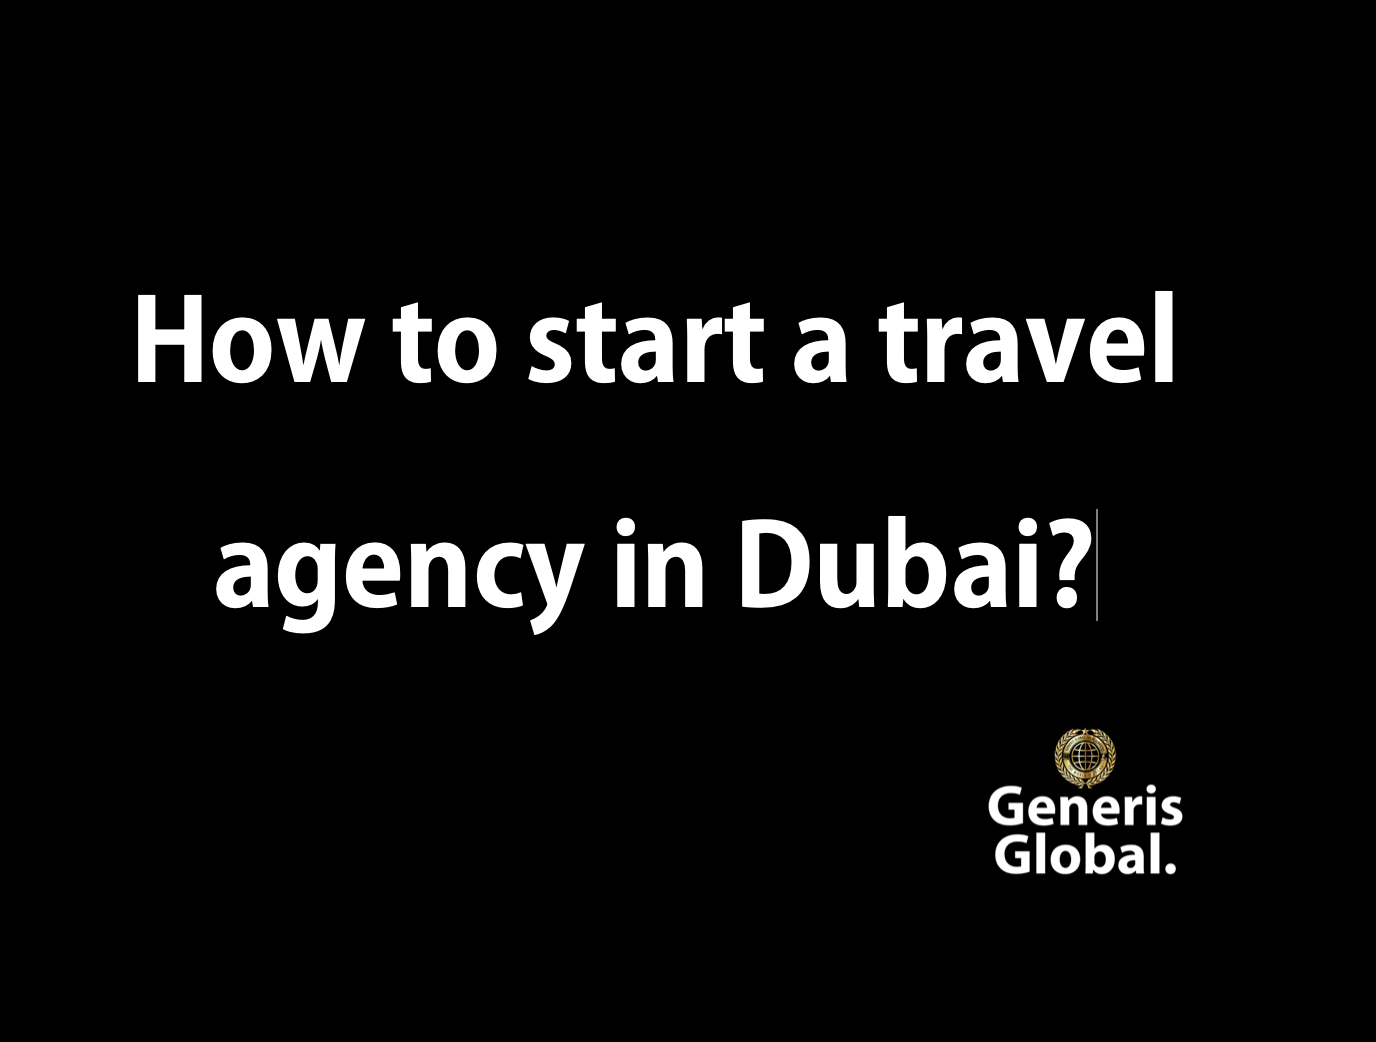 How to start a travel agency in Dubai?